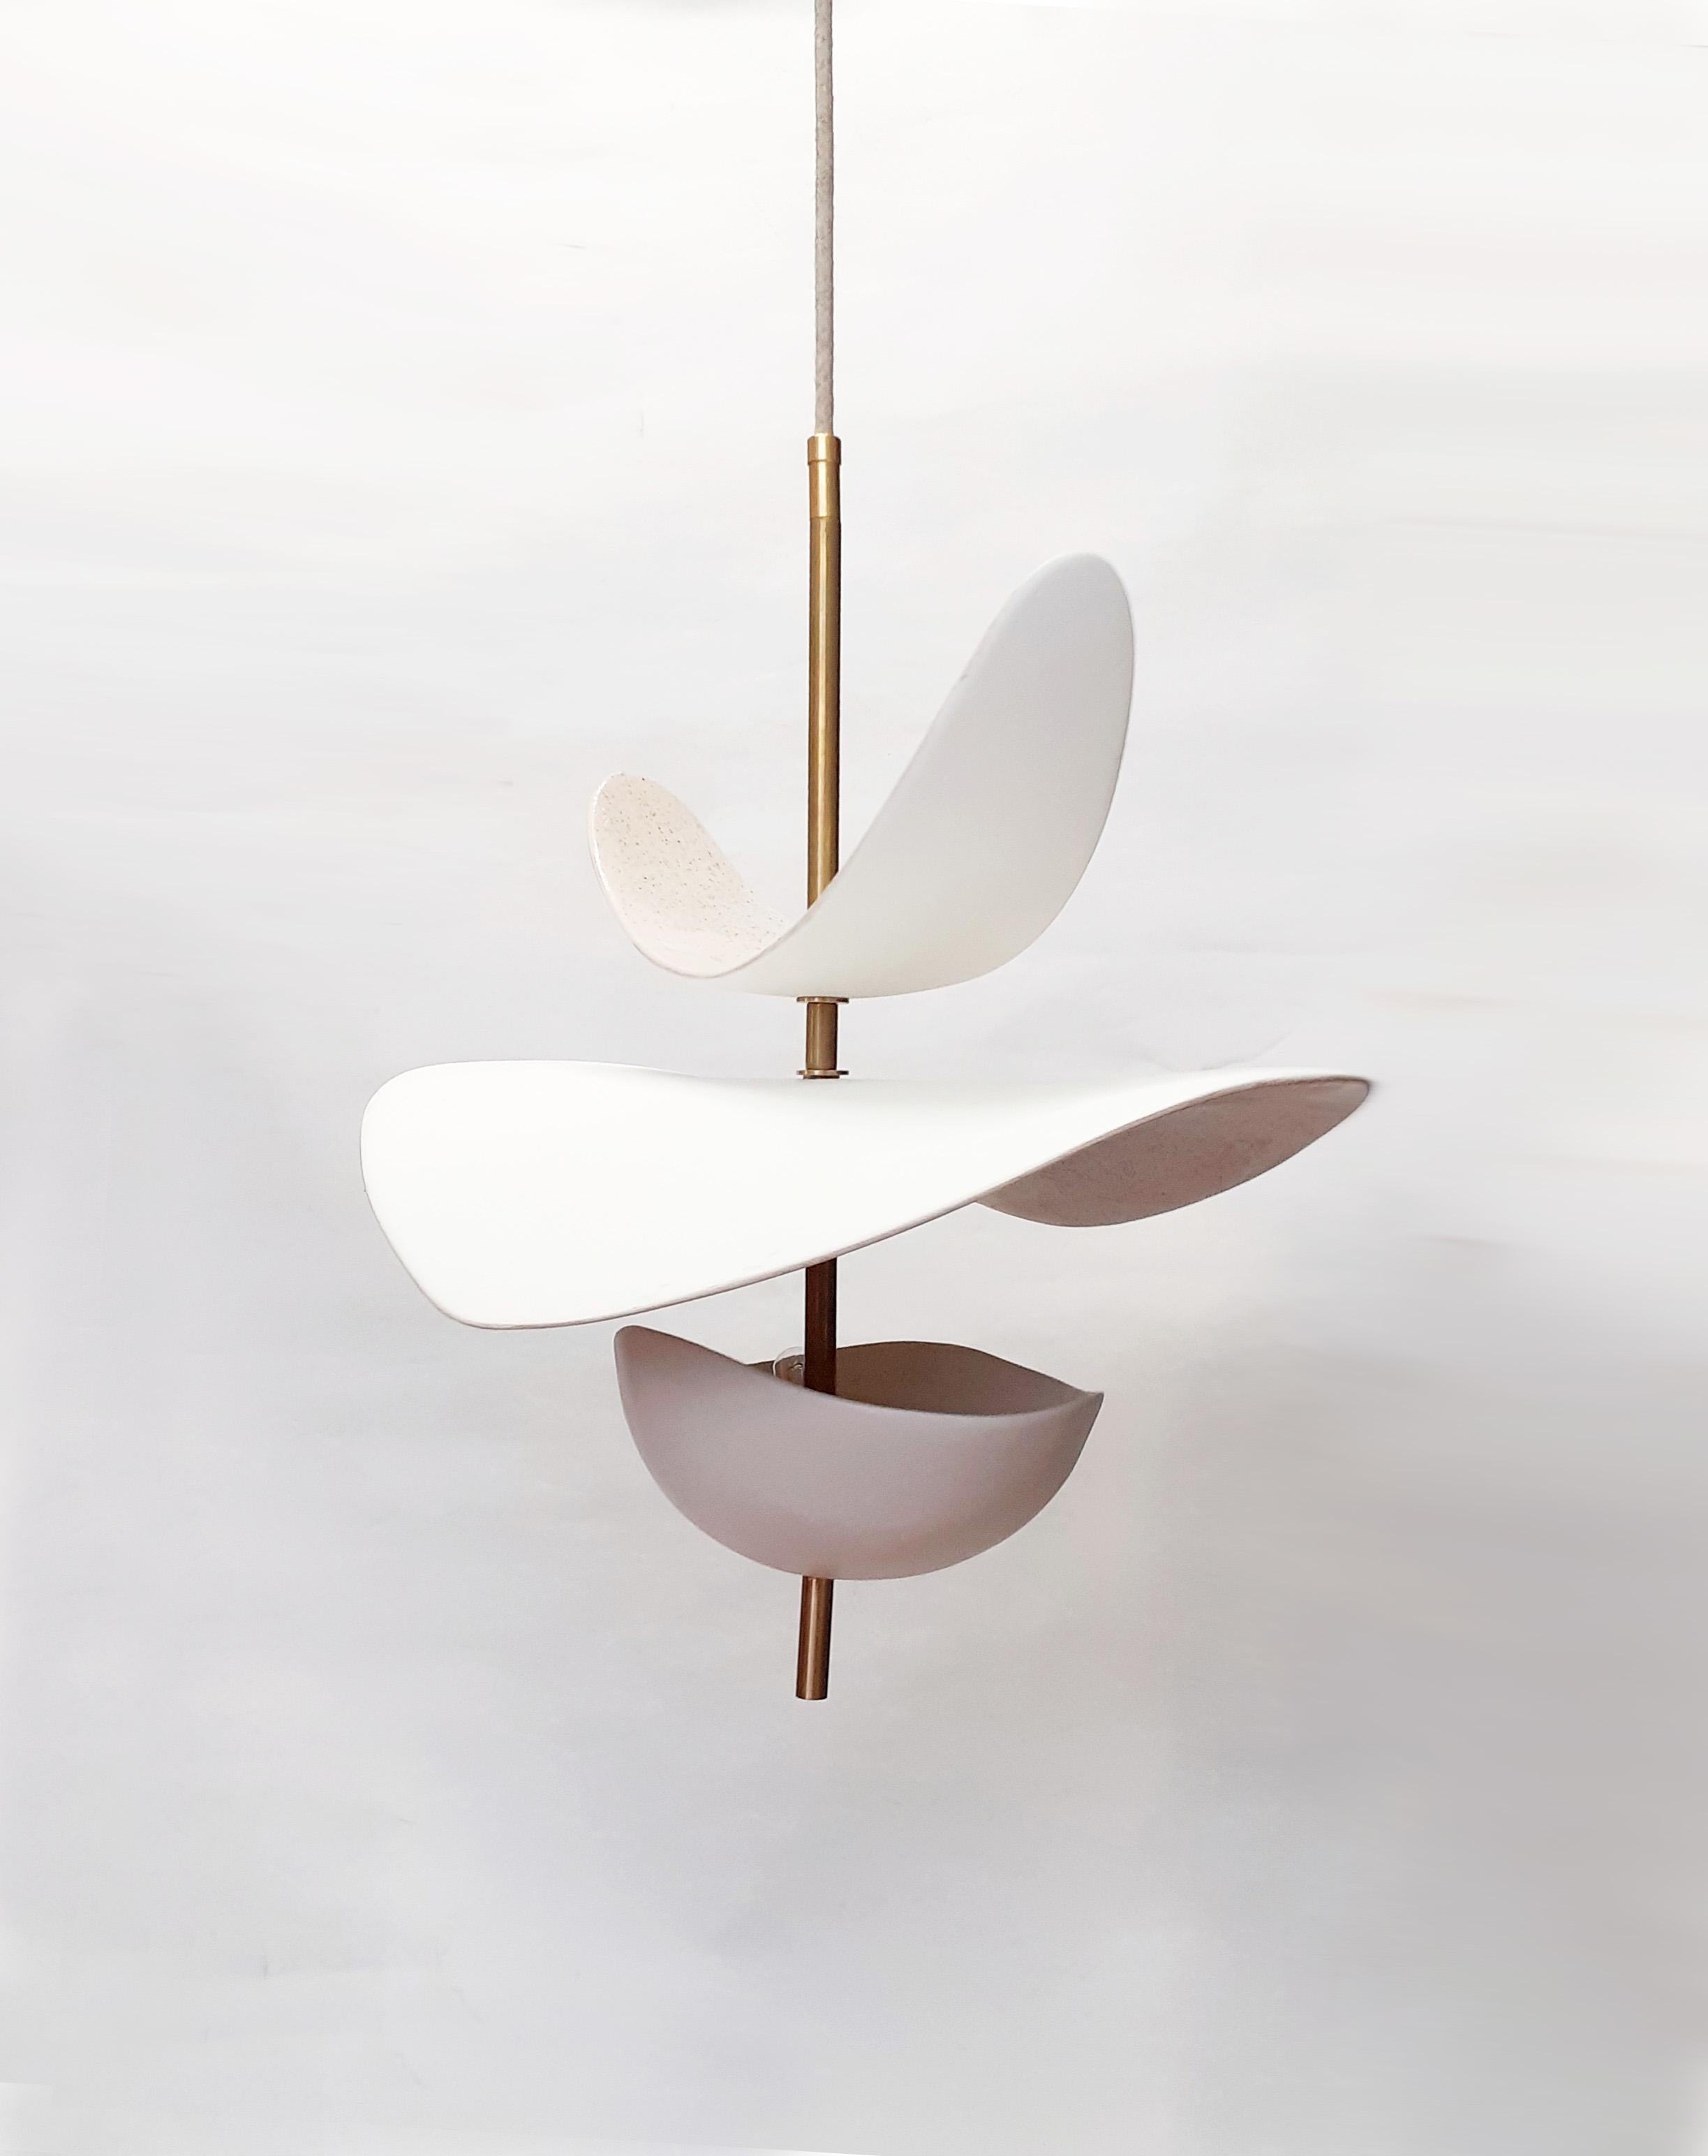 Sculptural ceramic suspension.
Poetic and organic design handmade by Elsa Foulon Studio in her Parisian workshop.
Enameled ceramic, brass structure and cotton electric wire.
This suspension can be installed as you wish. Whatever height you prefer